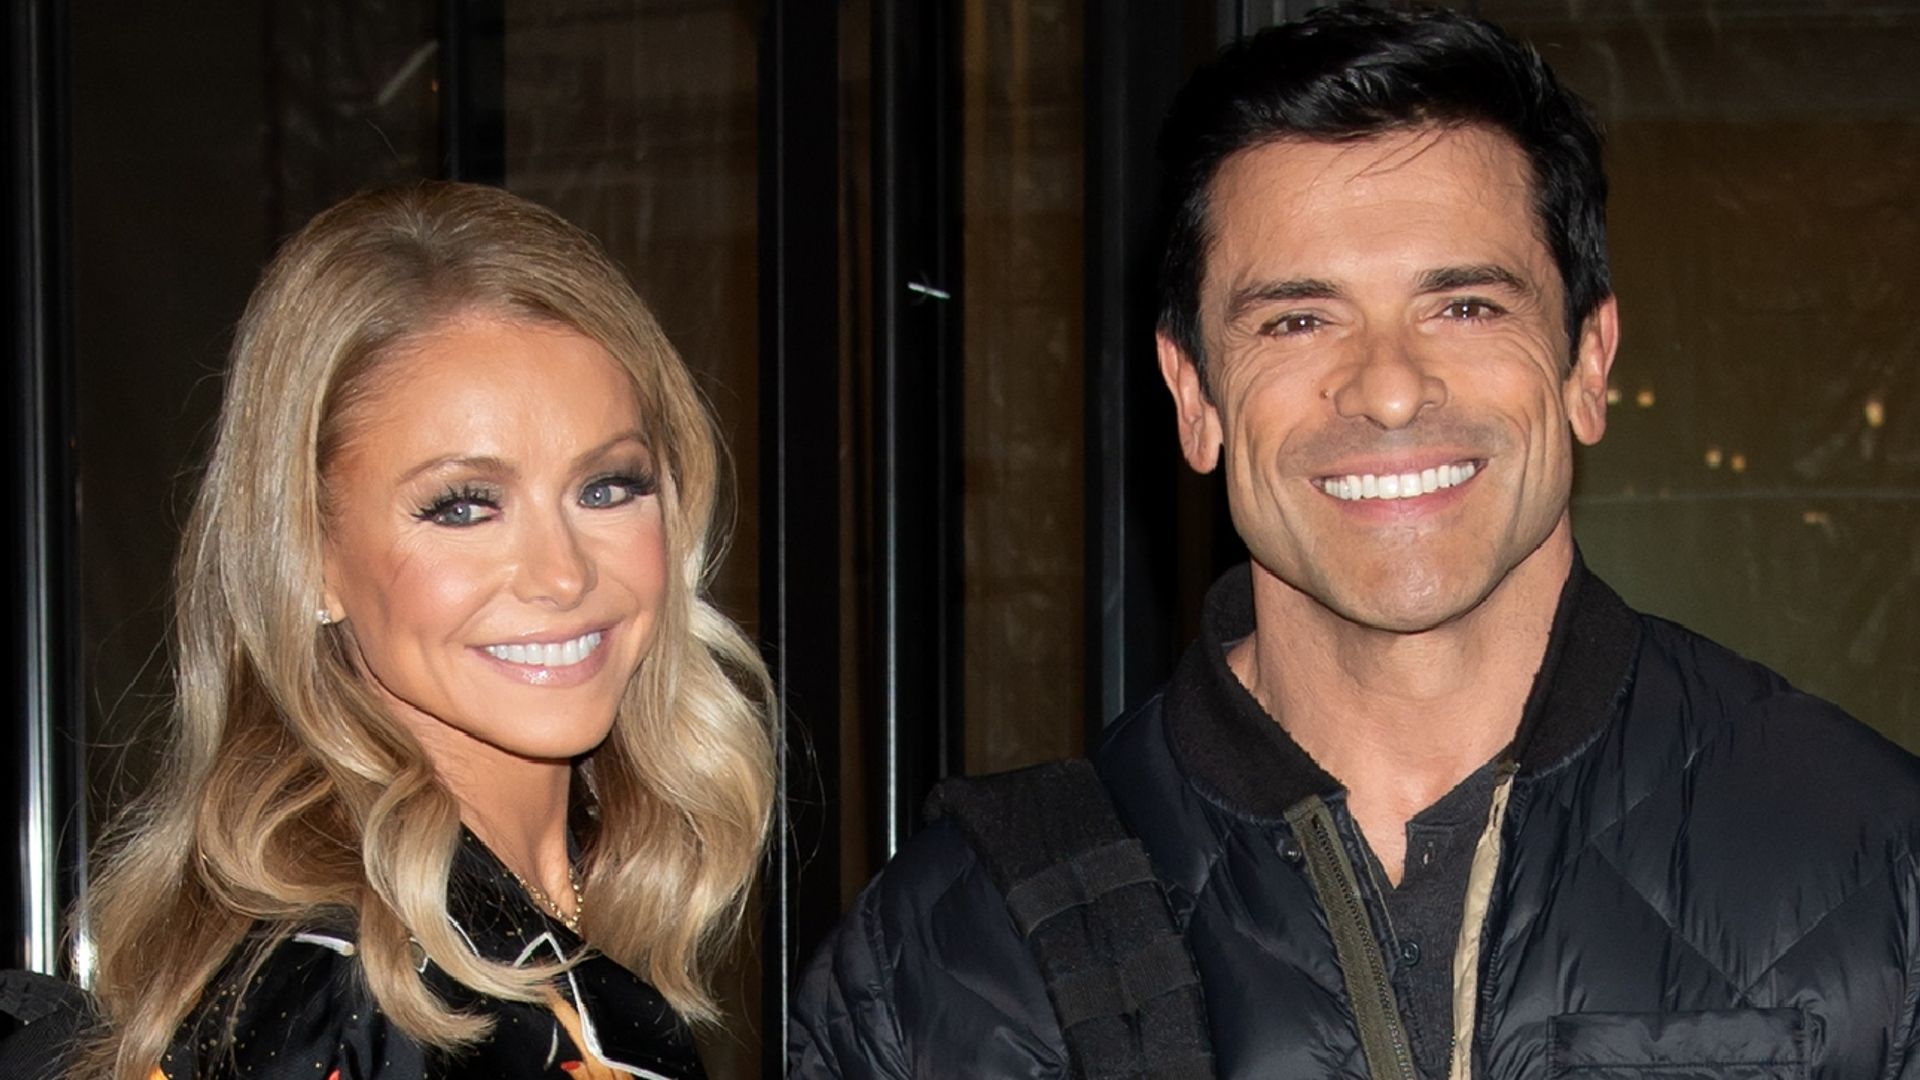 Kelly Ripa and Mark Consuelos get all dressed up for Oscars party date night